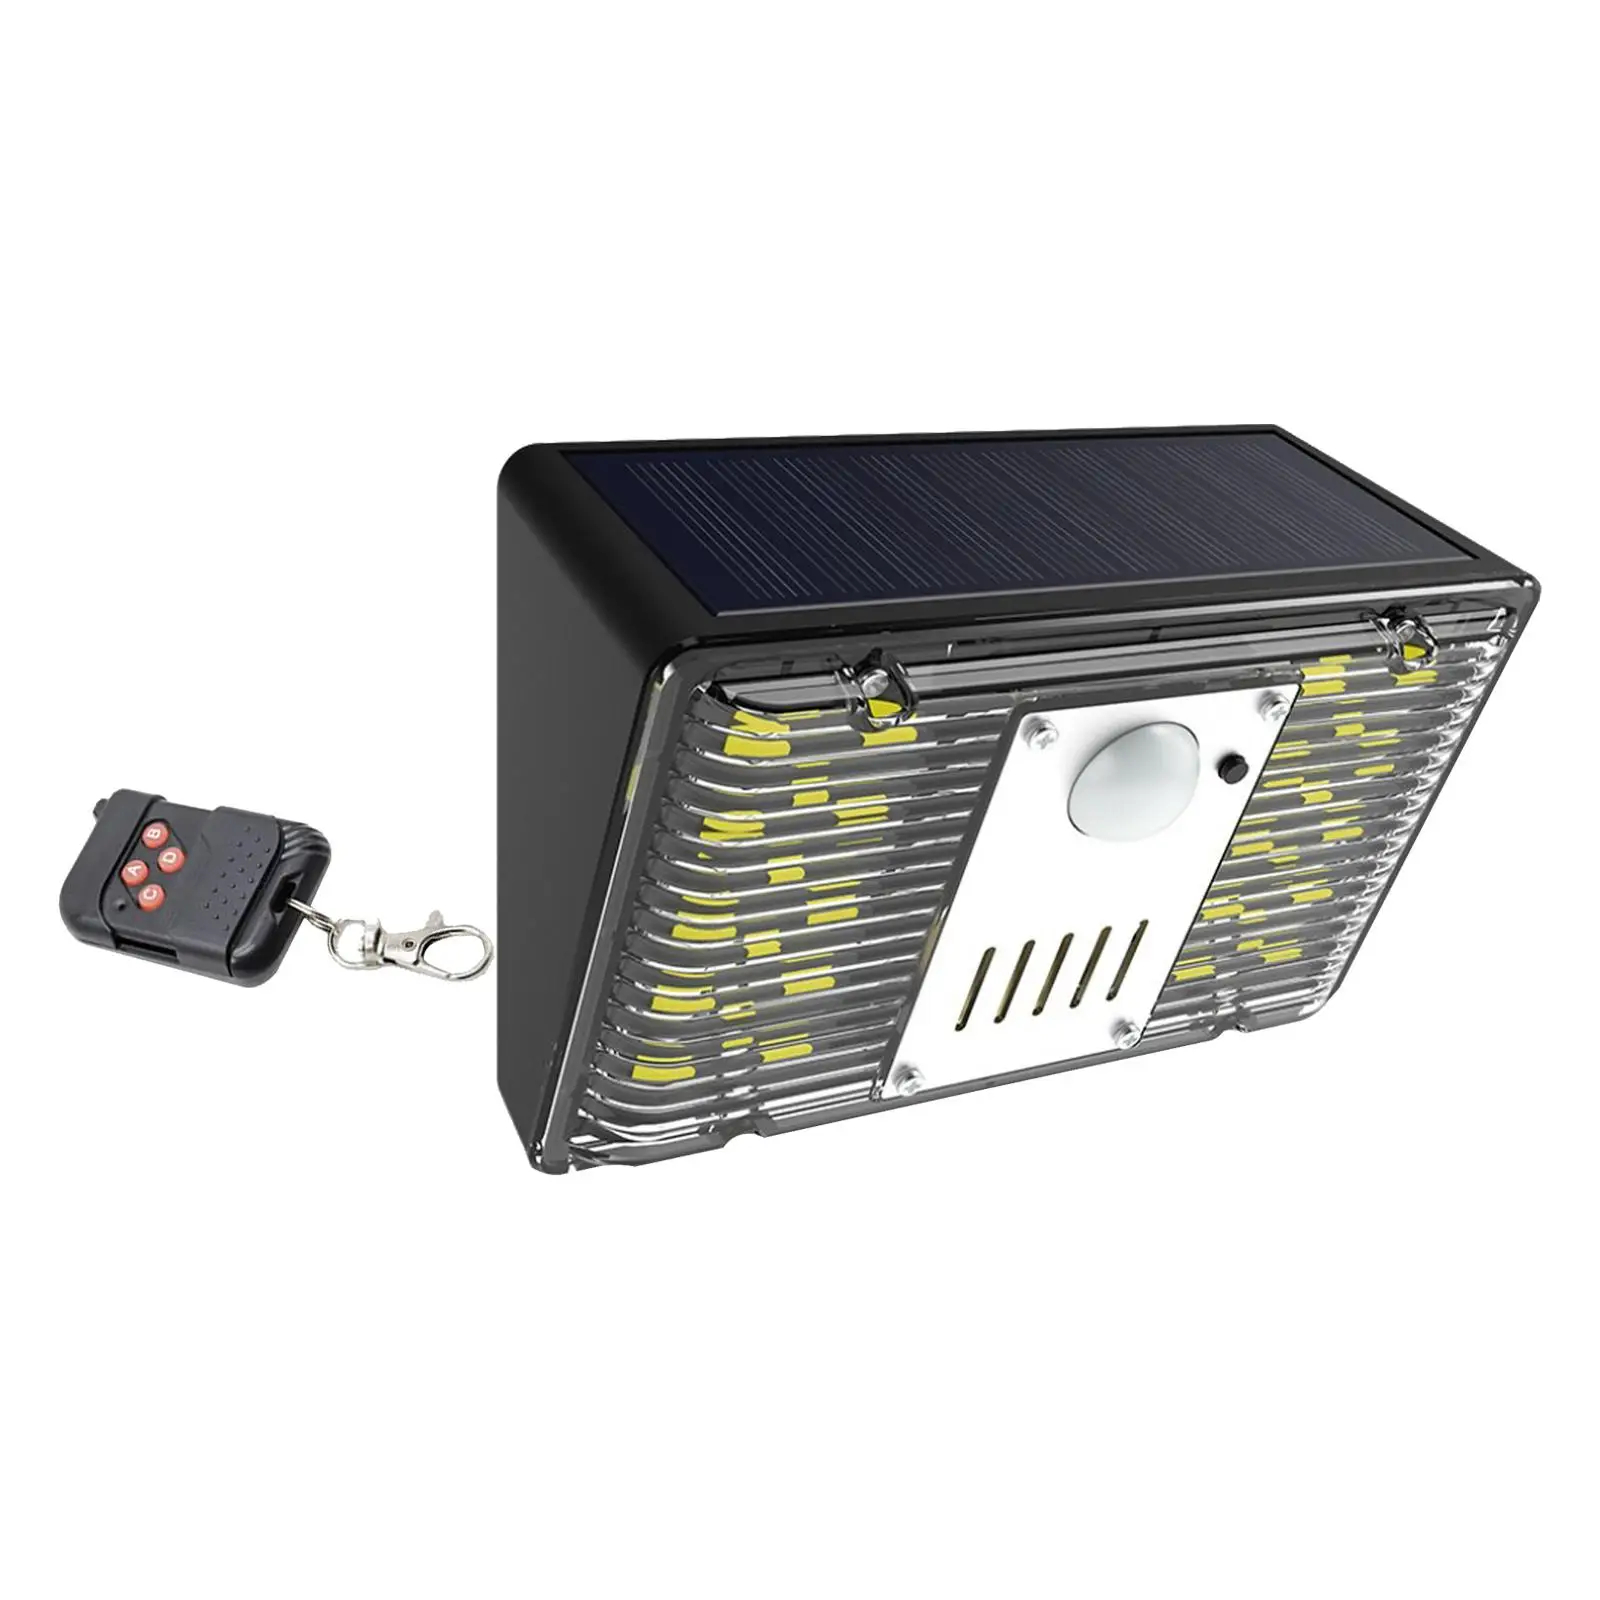 Solar Lamp with Remote Durable 129dB Loud Alarm 3 Work Modes Courtyard wall lights for Villa Outdoor Driving Animals yard